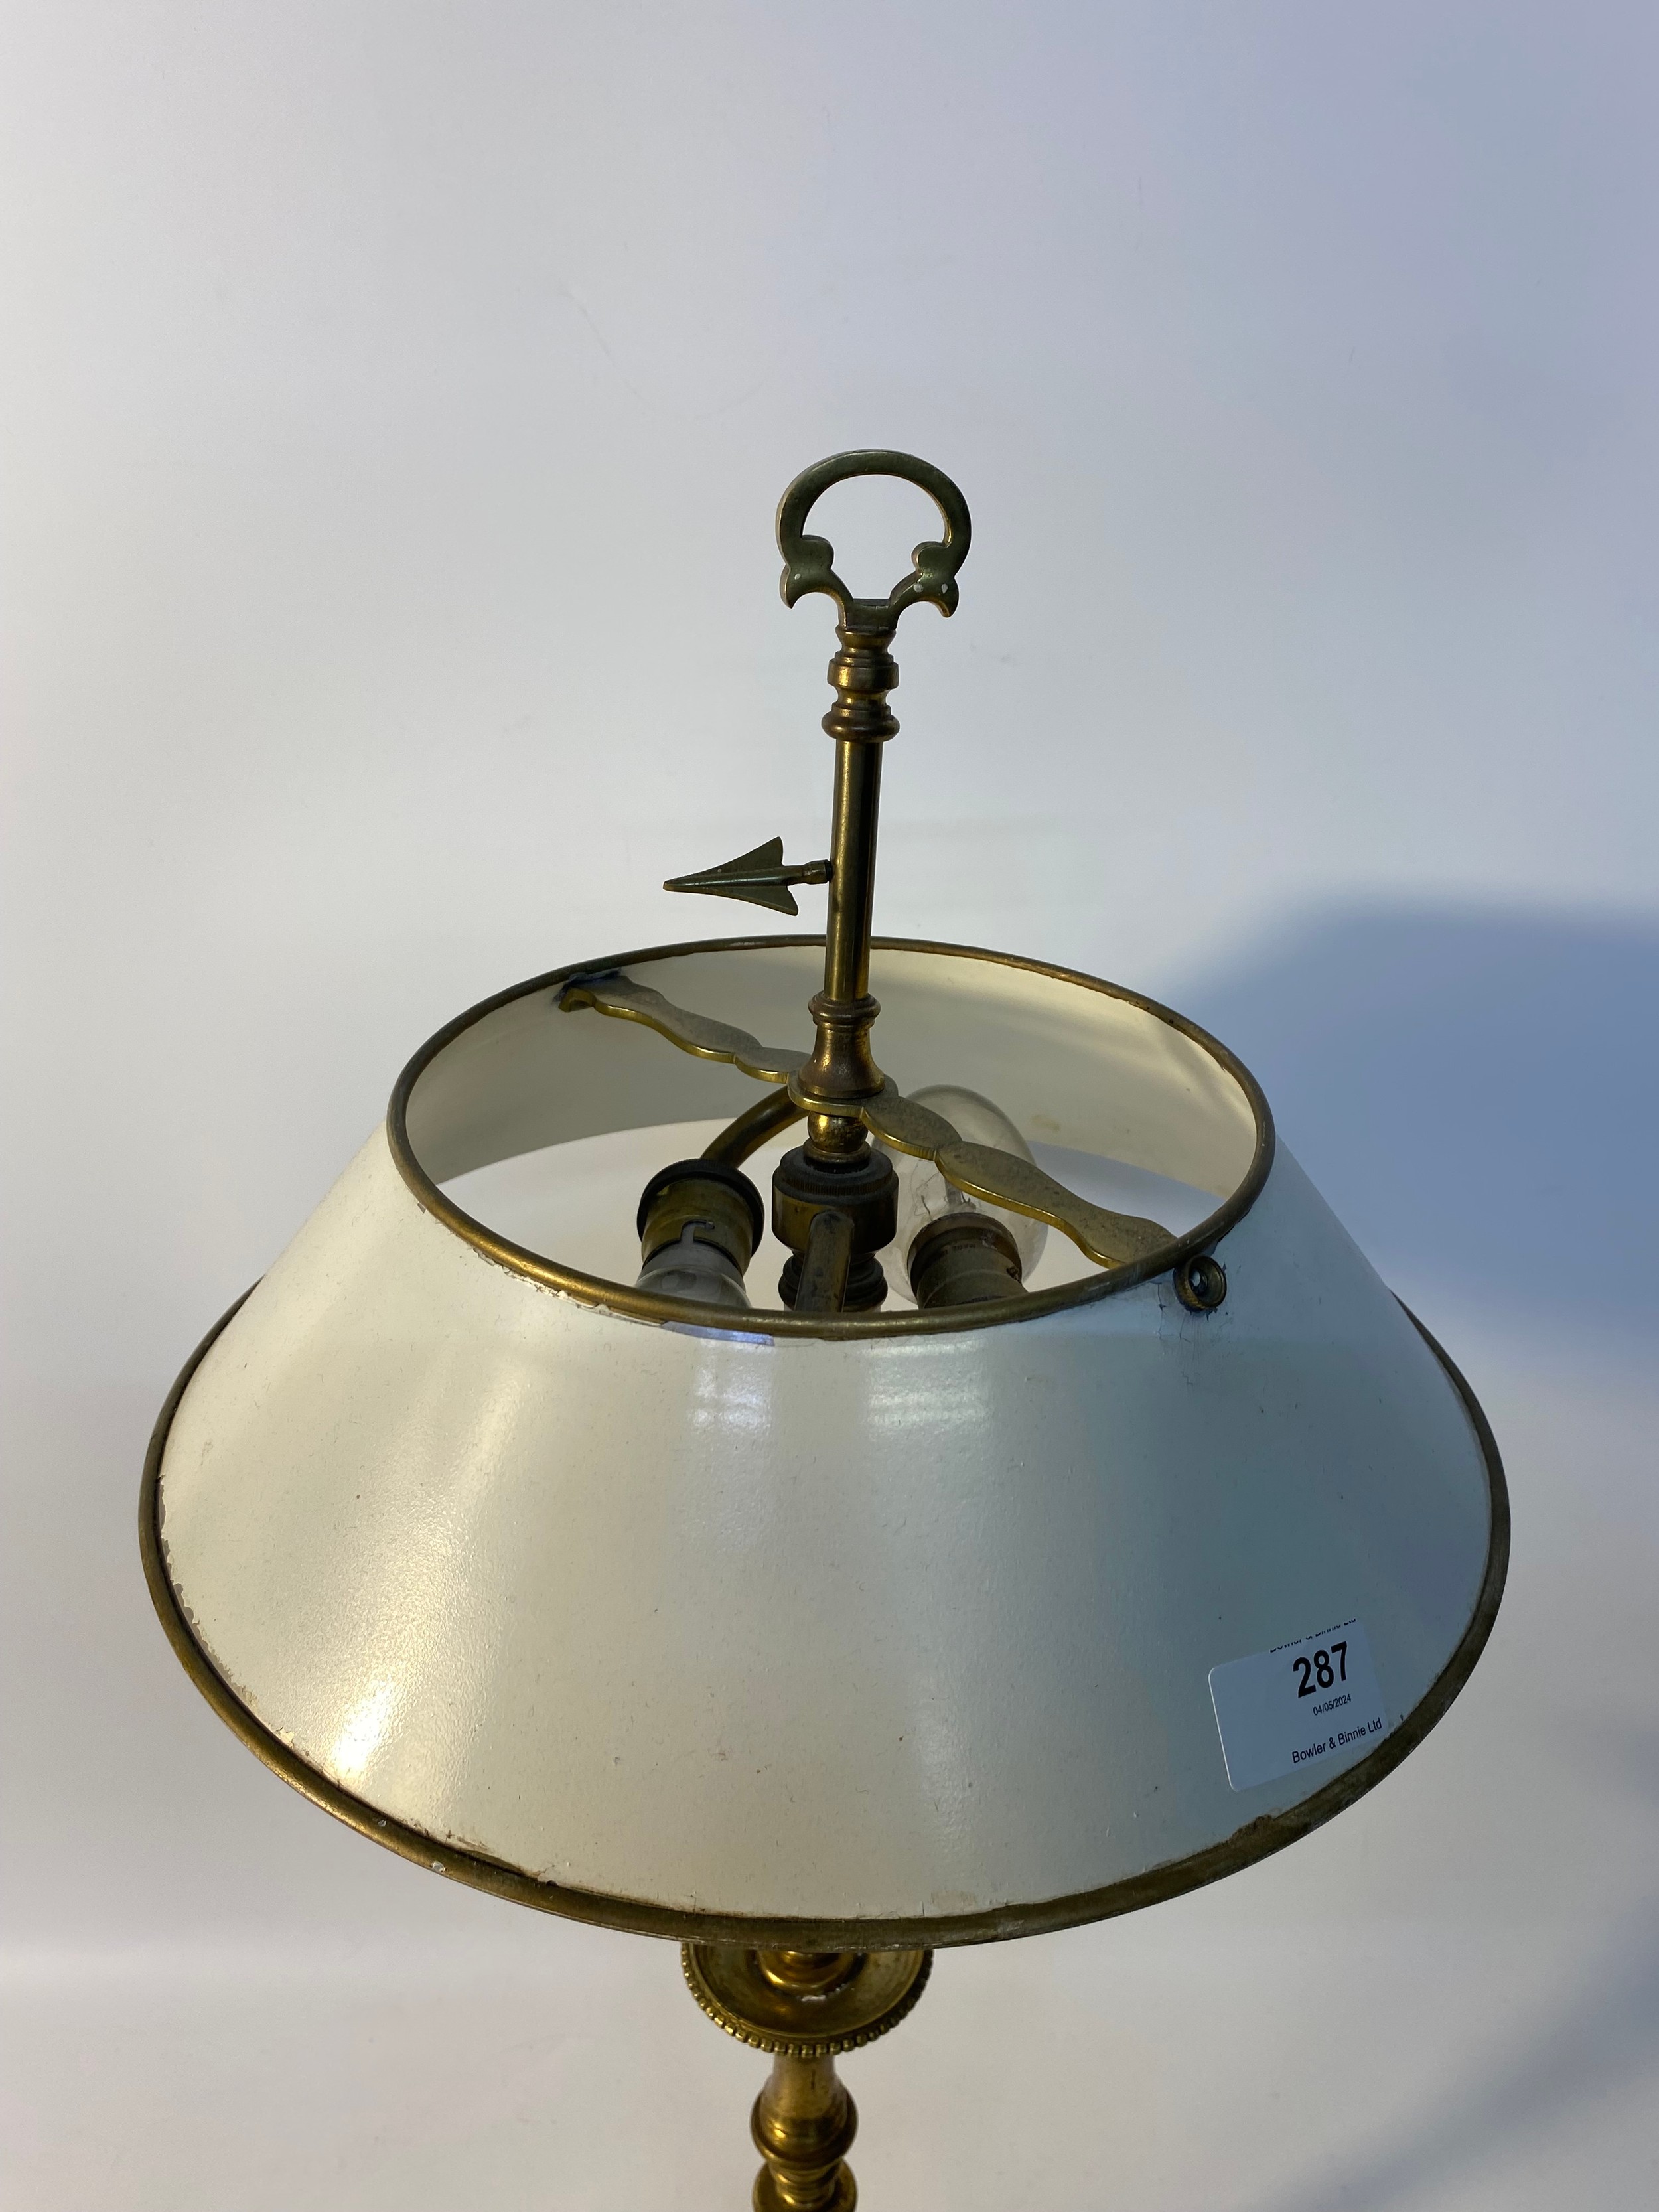 20th century brass desk table lamp with enamel shade [66cm] - Image 4 of 4